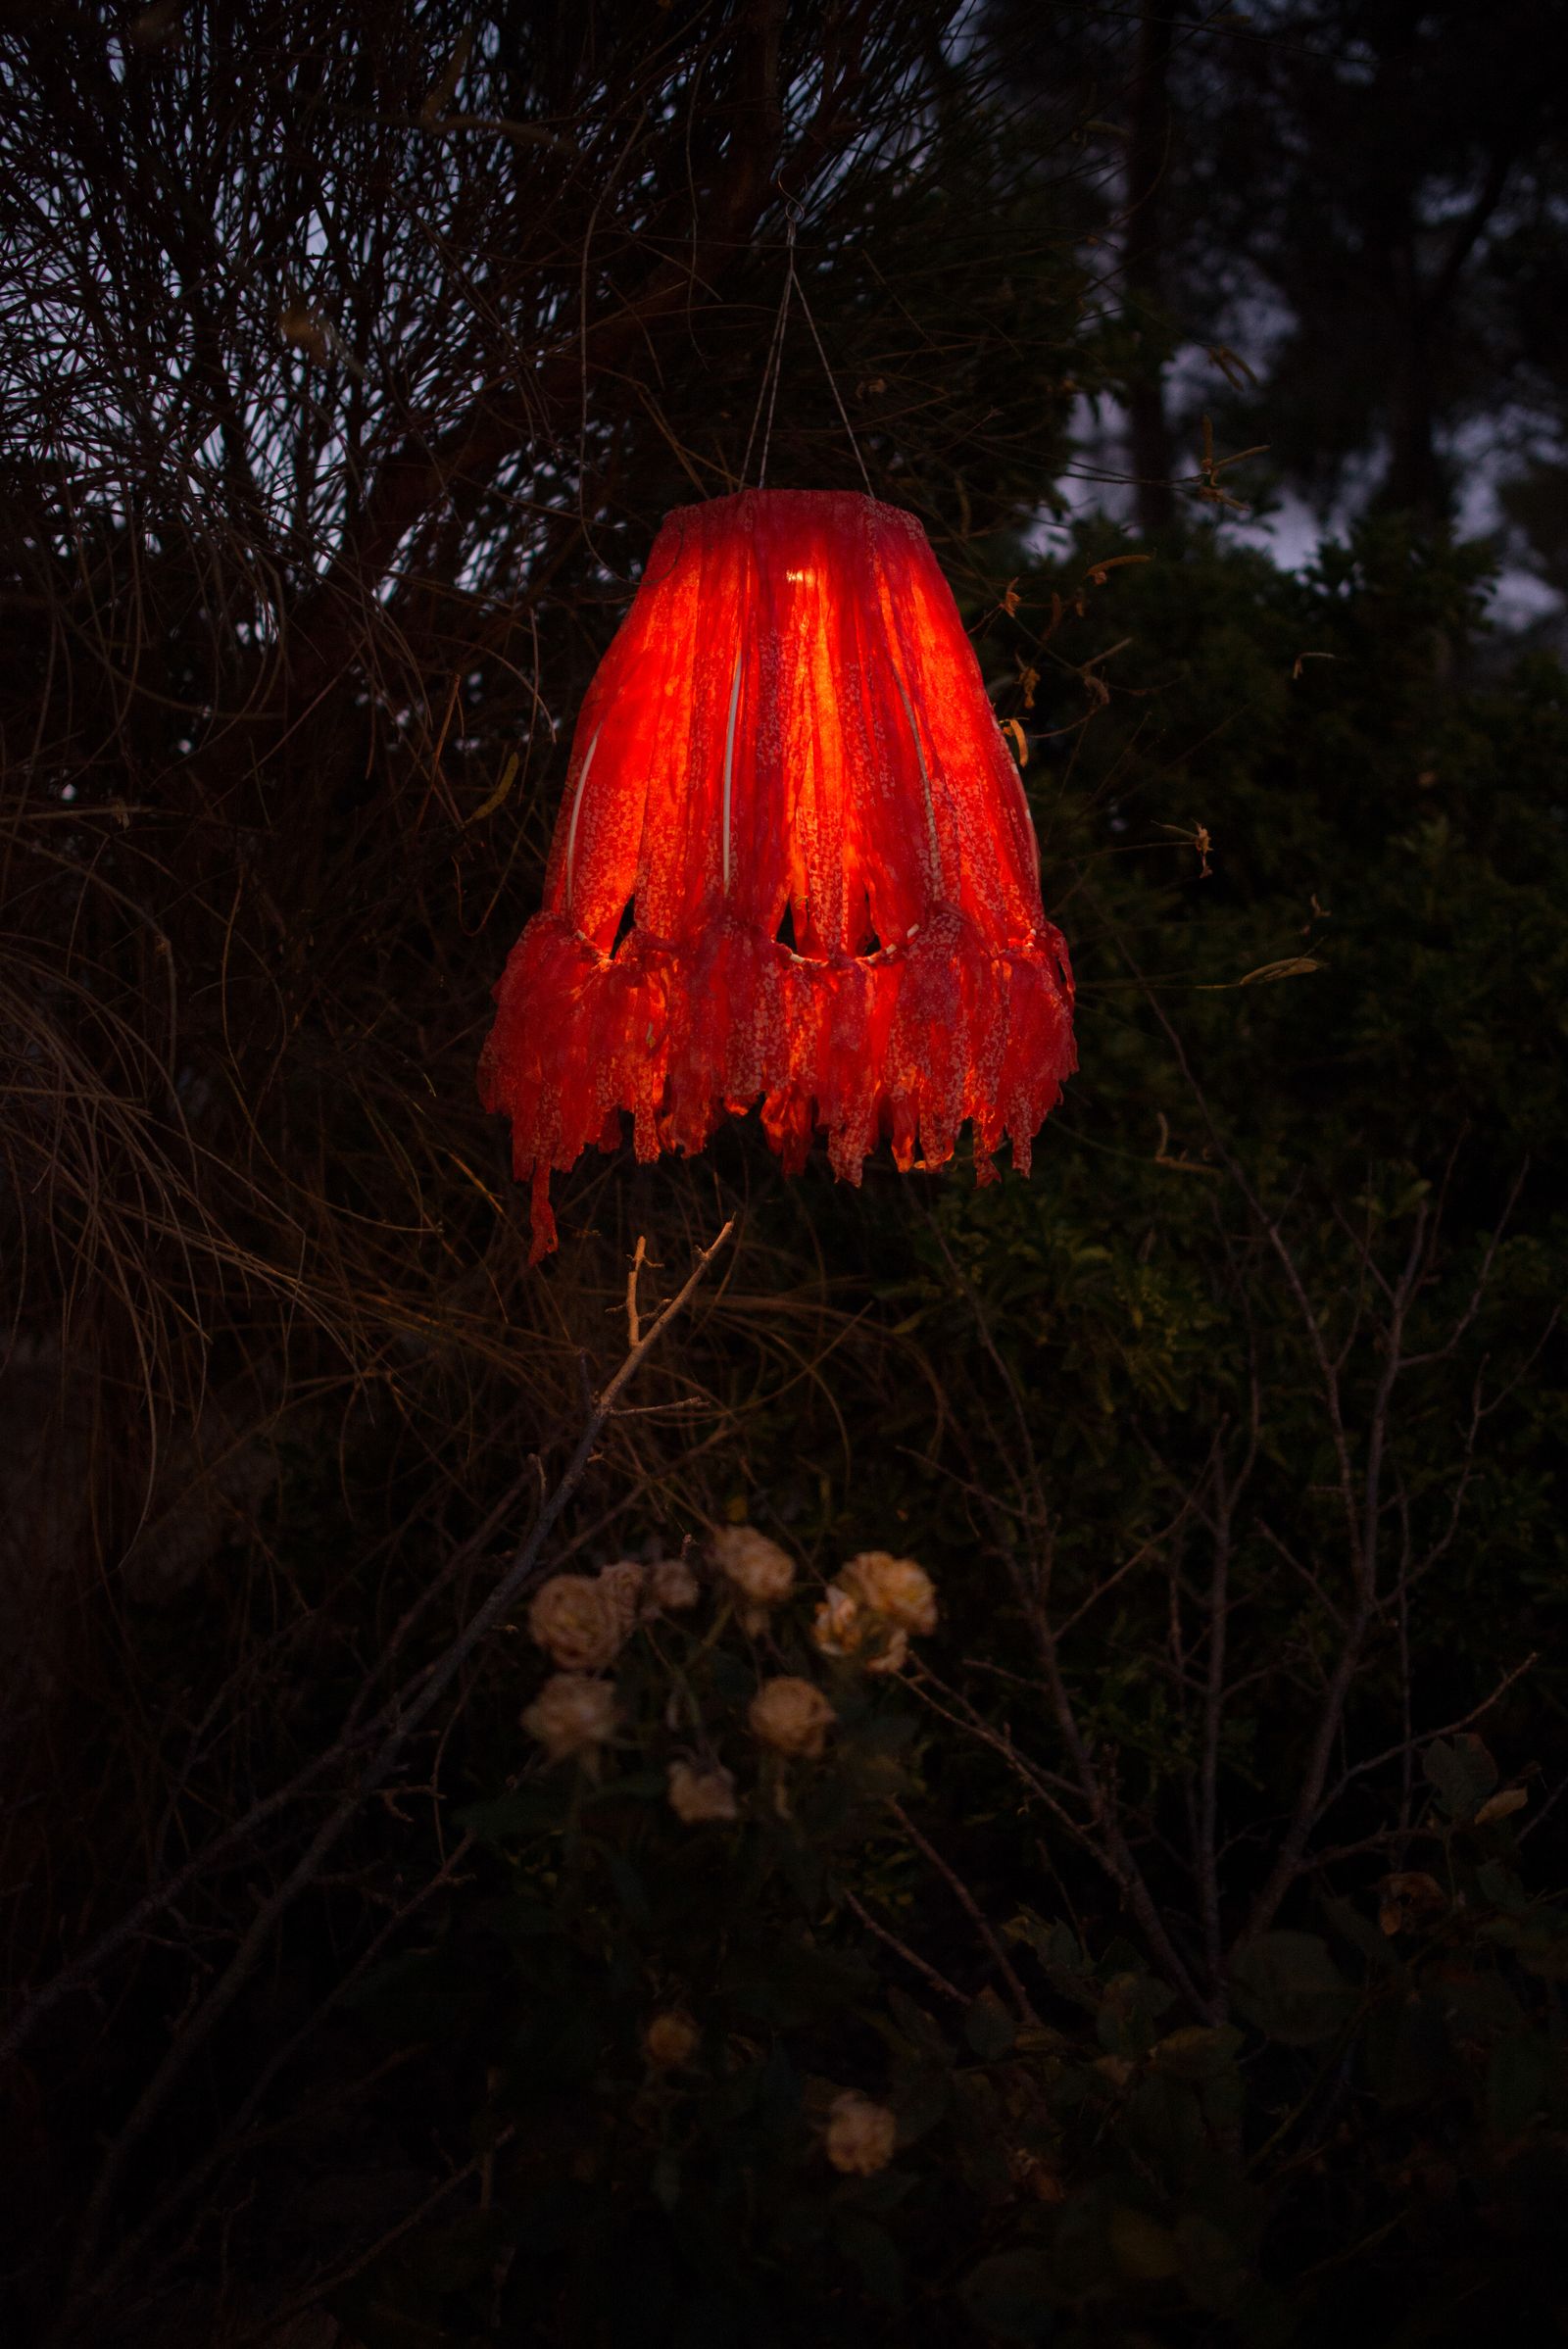 © Veronica Andrea Sauchelli - Sannicola, Lecce, Italy A lamp from Chiara's biodynamic forest, regenerated after the fires.